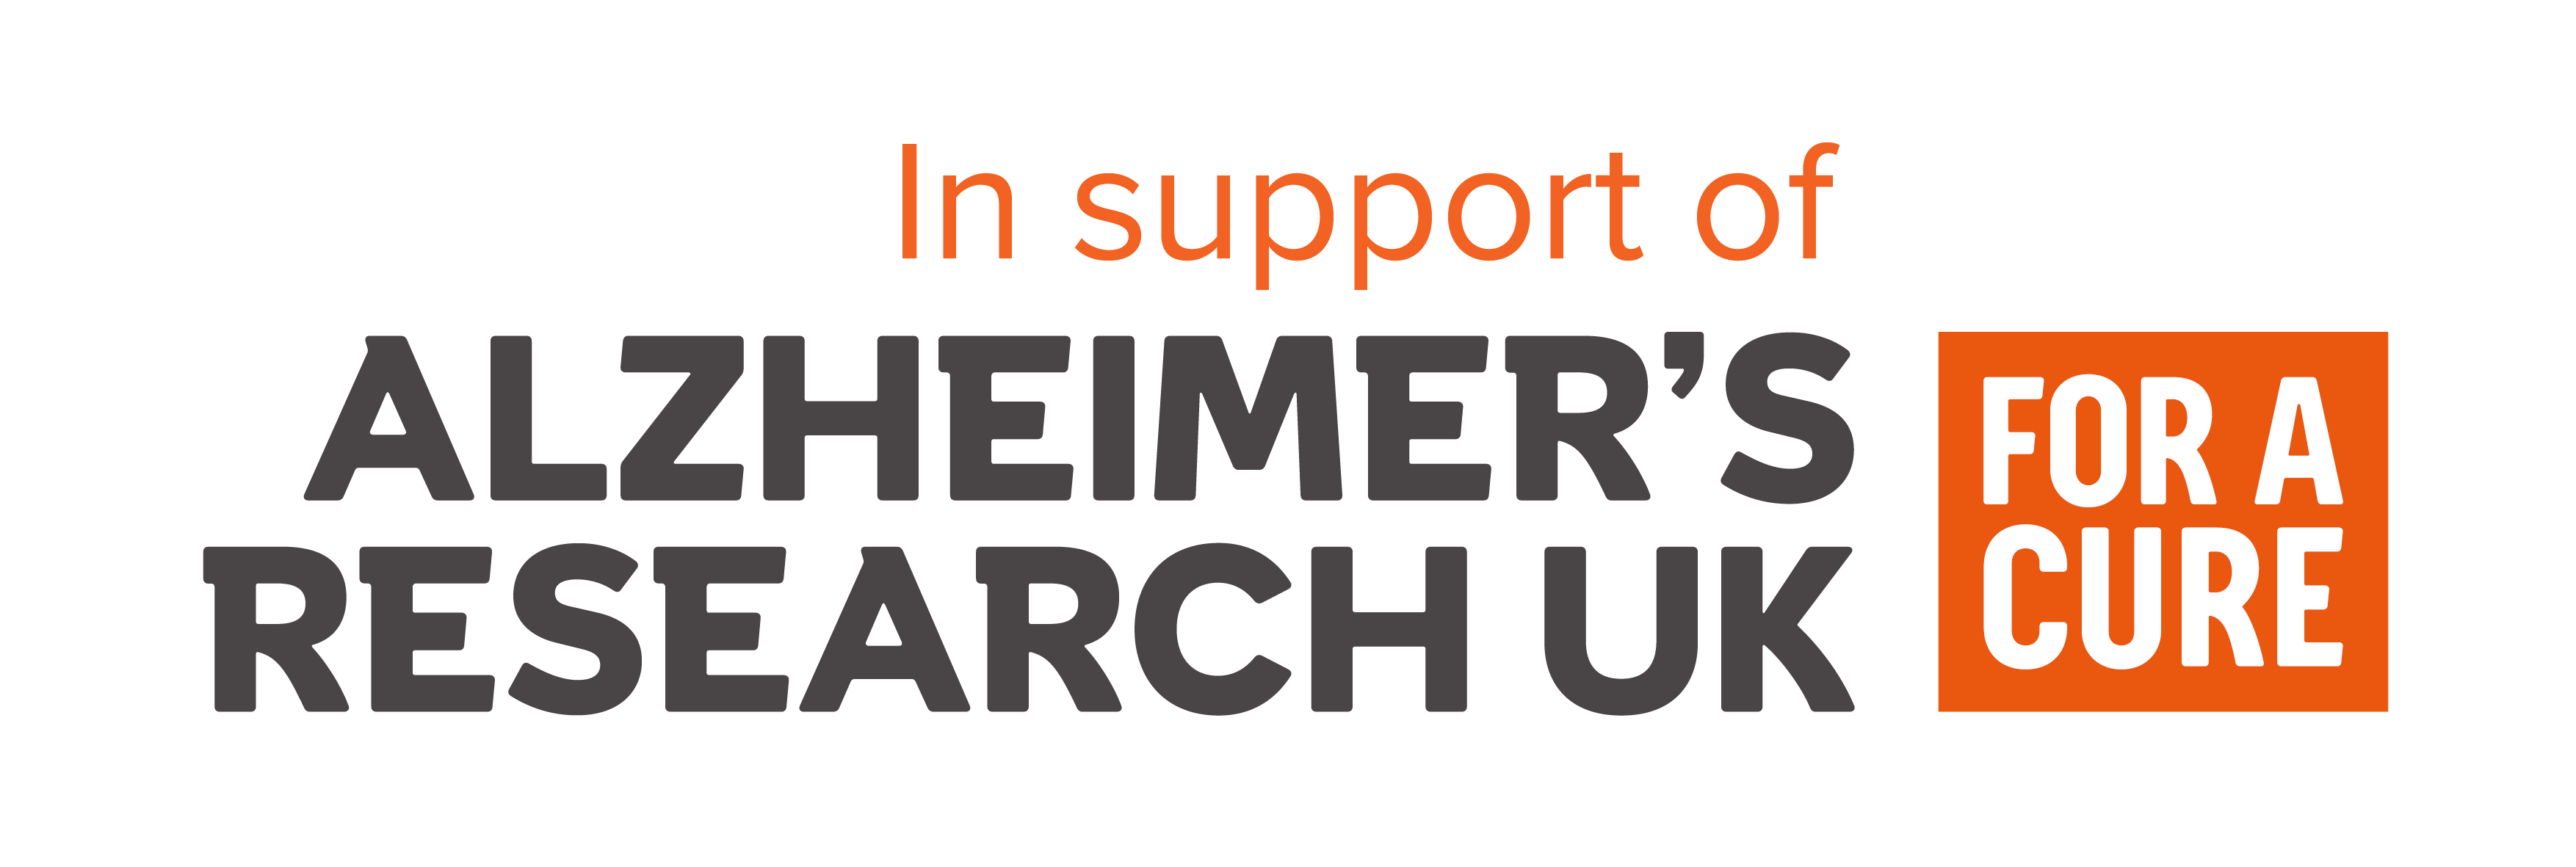 In support of Alzheimer's Research UK